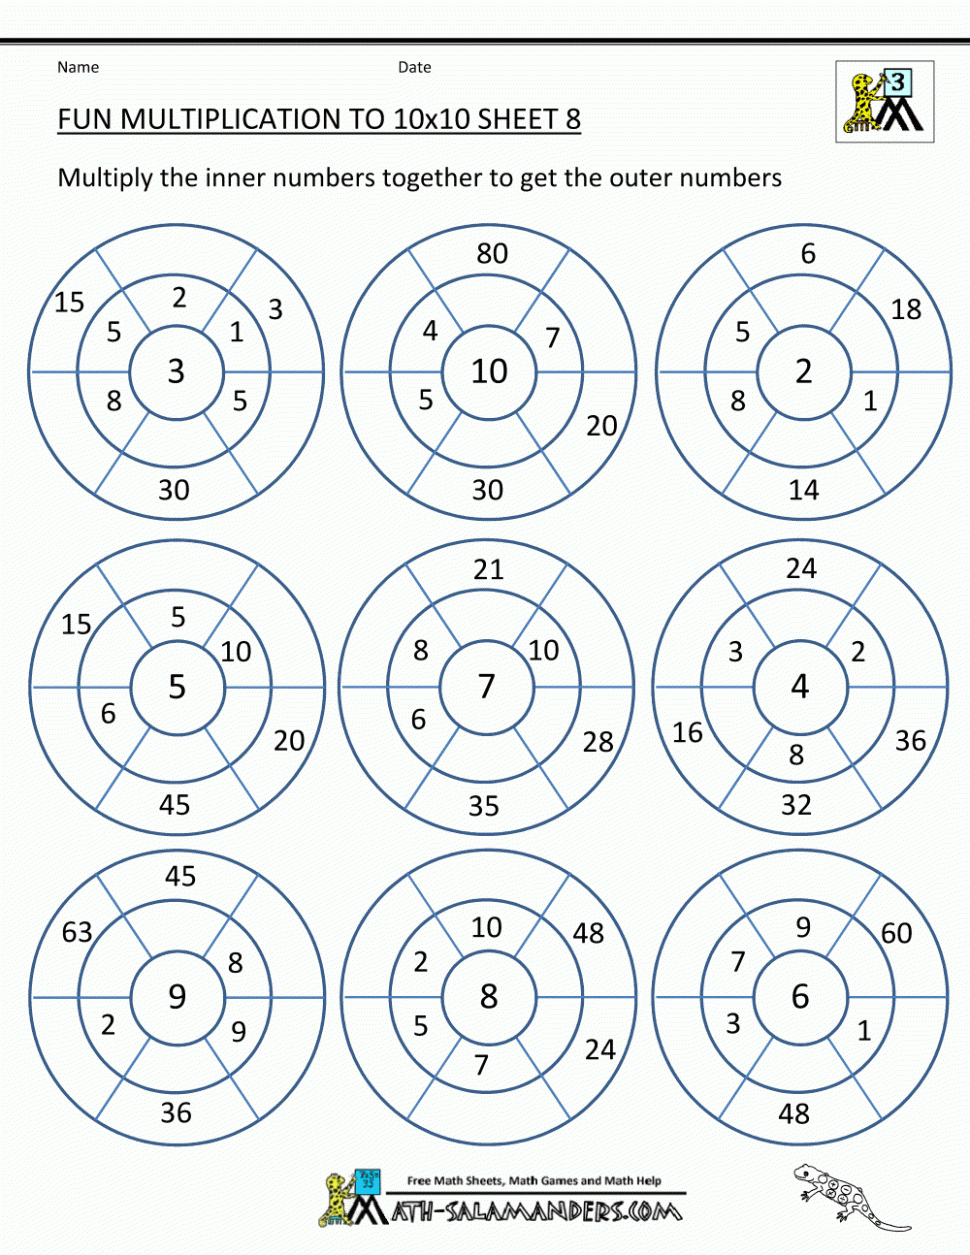 Multiplication Facts Worksheets Understanding Multiplication To 10X10 